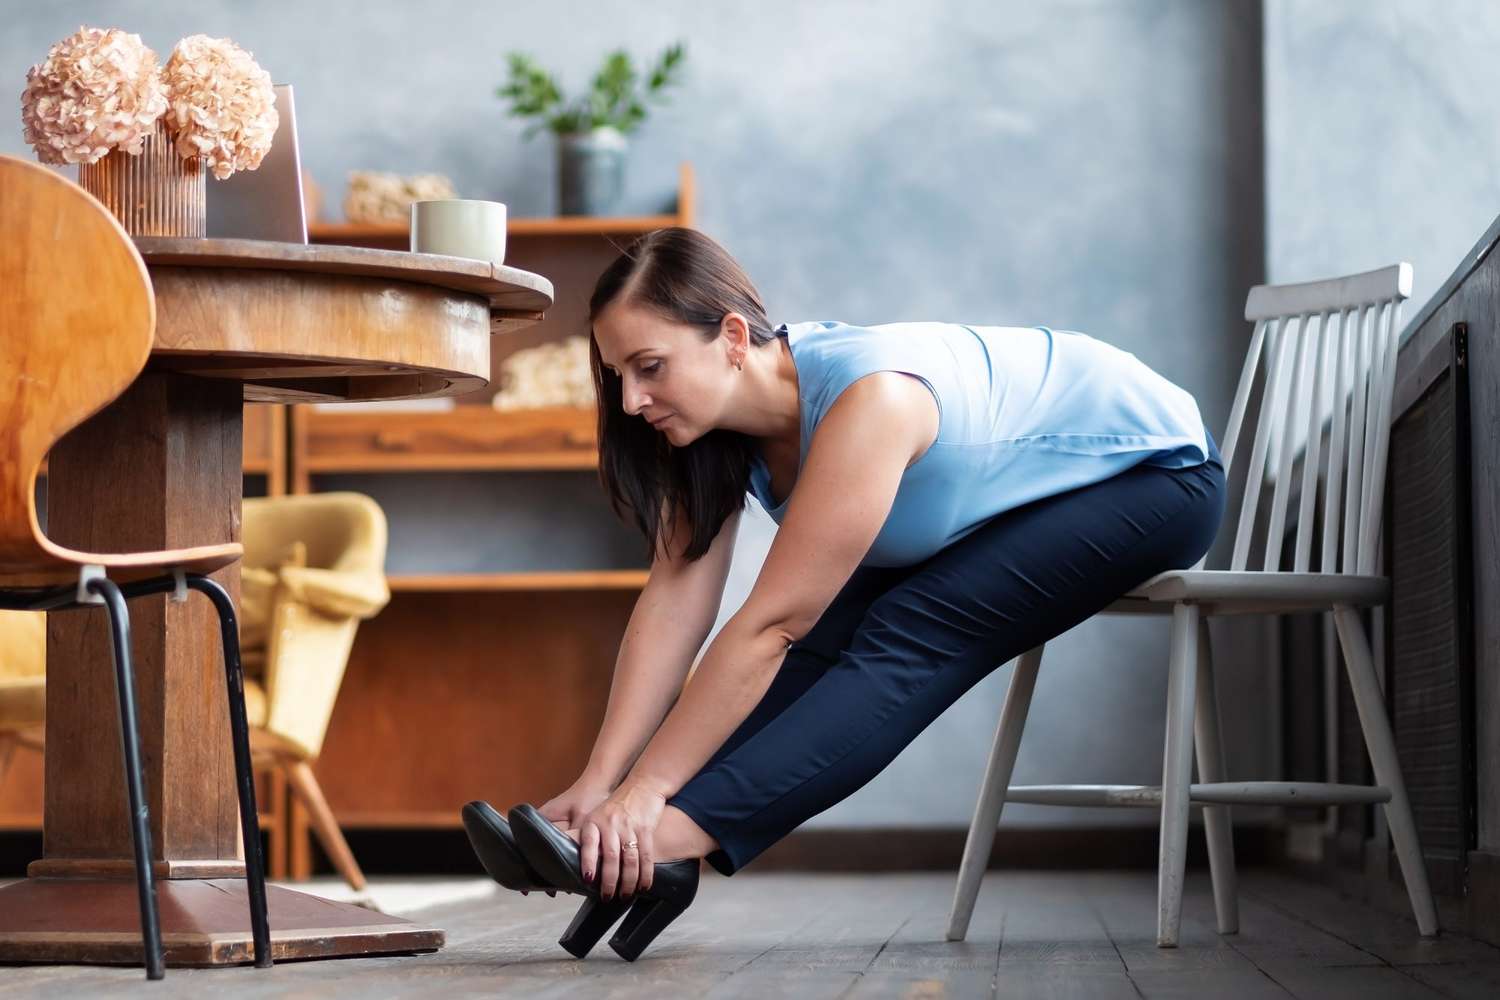 Chair Yoga Poses and Stretching: woman sitting in a chair and stretching to touch her toes